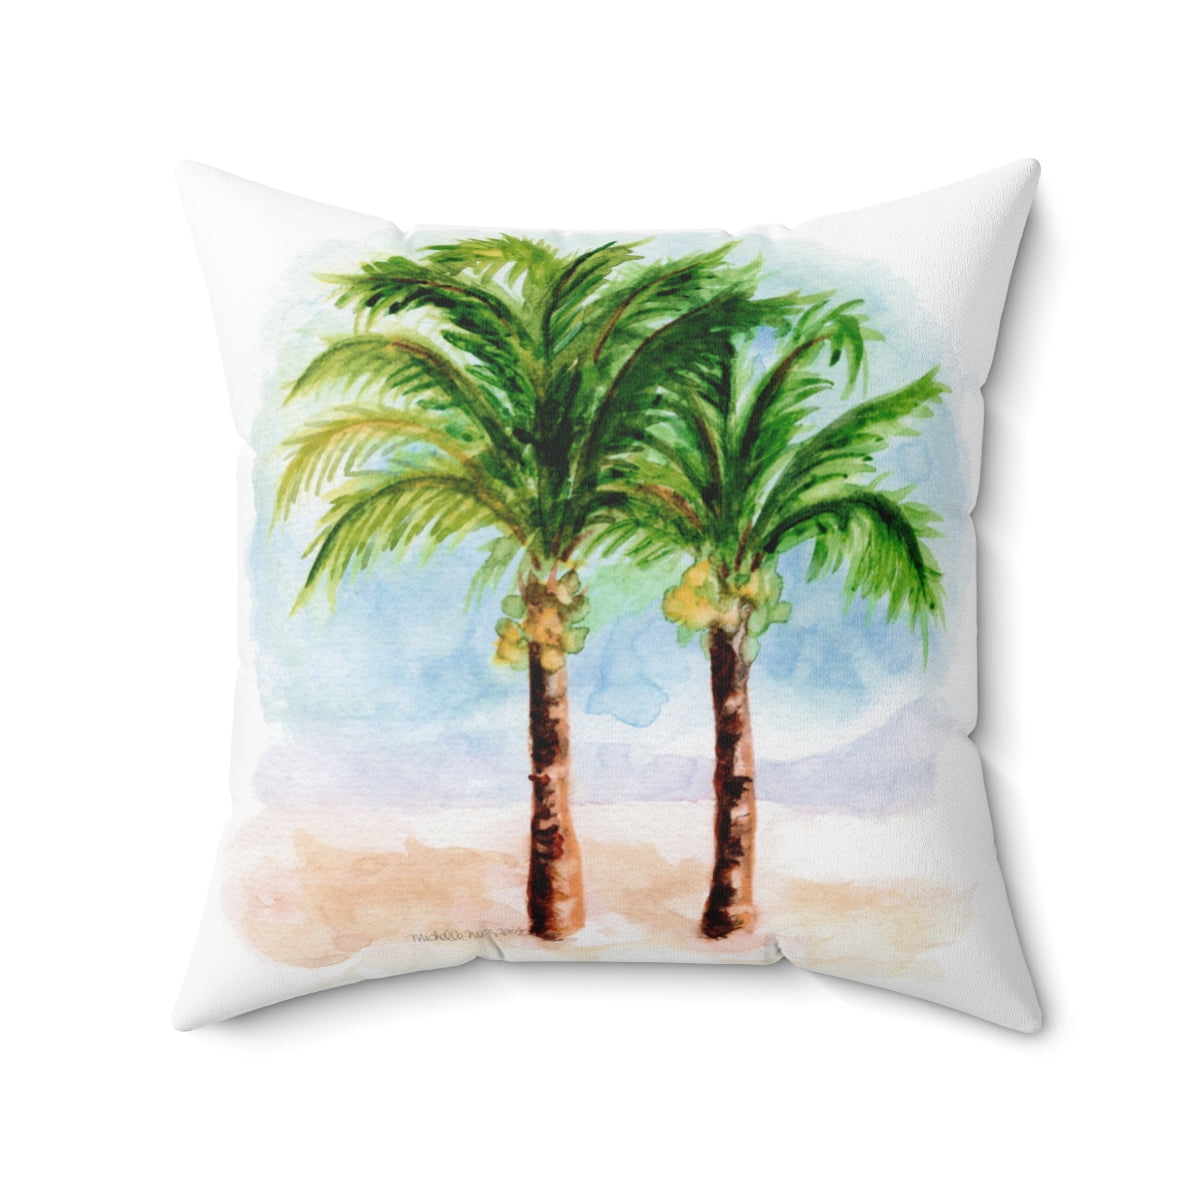 Watercolor Tropical Palm Trees Square Pillow by Artist Michelle Mospens